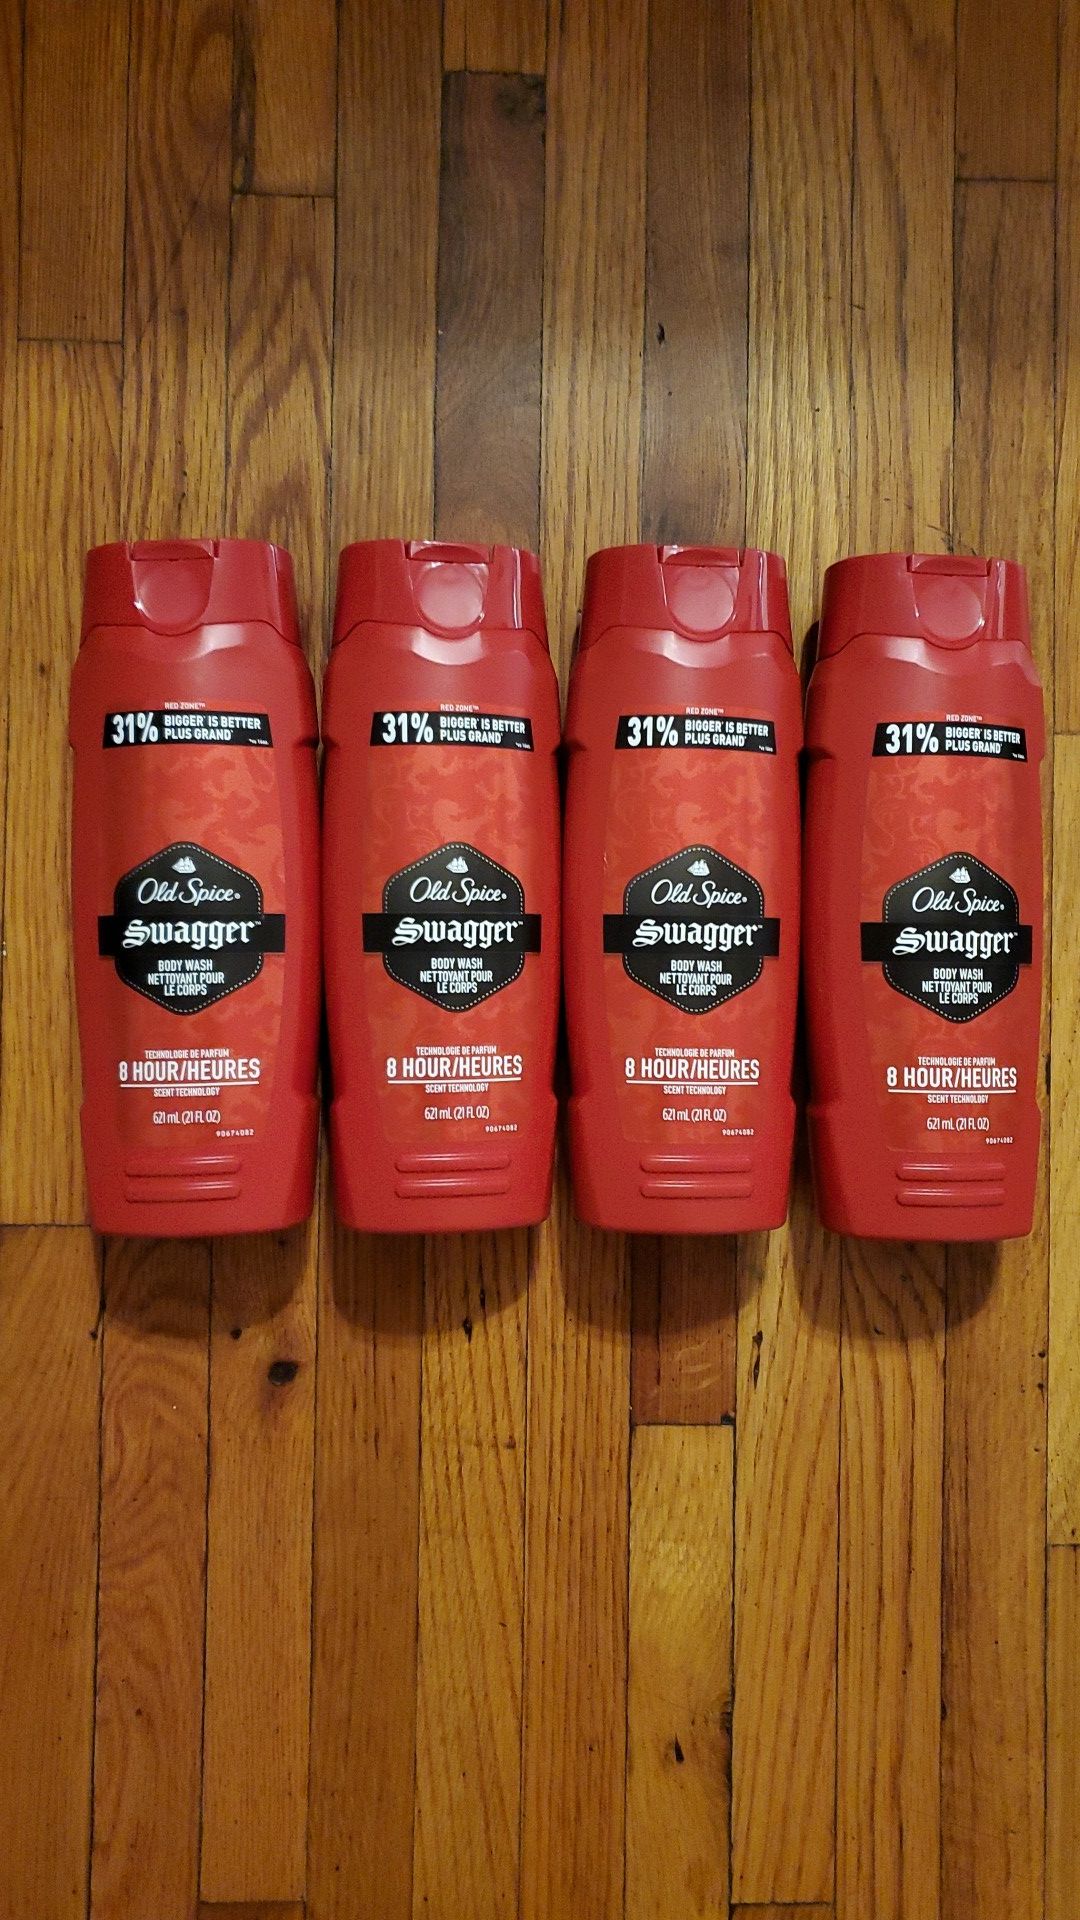 Old spice swagger bodywash $4 each 5 left